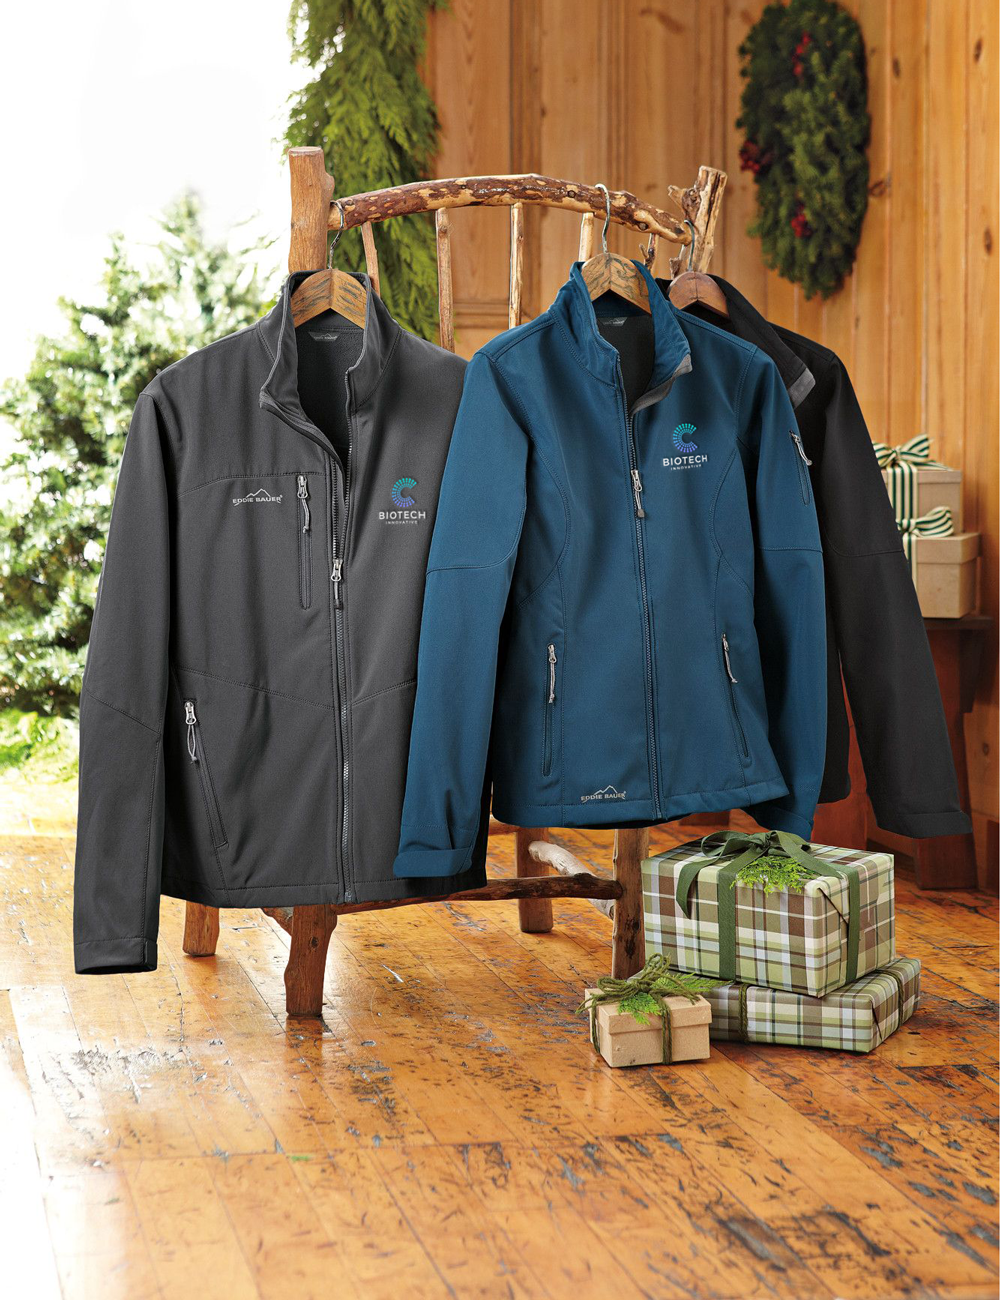 Winter jackets embroidered as custom corporate gifts